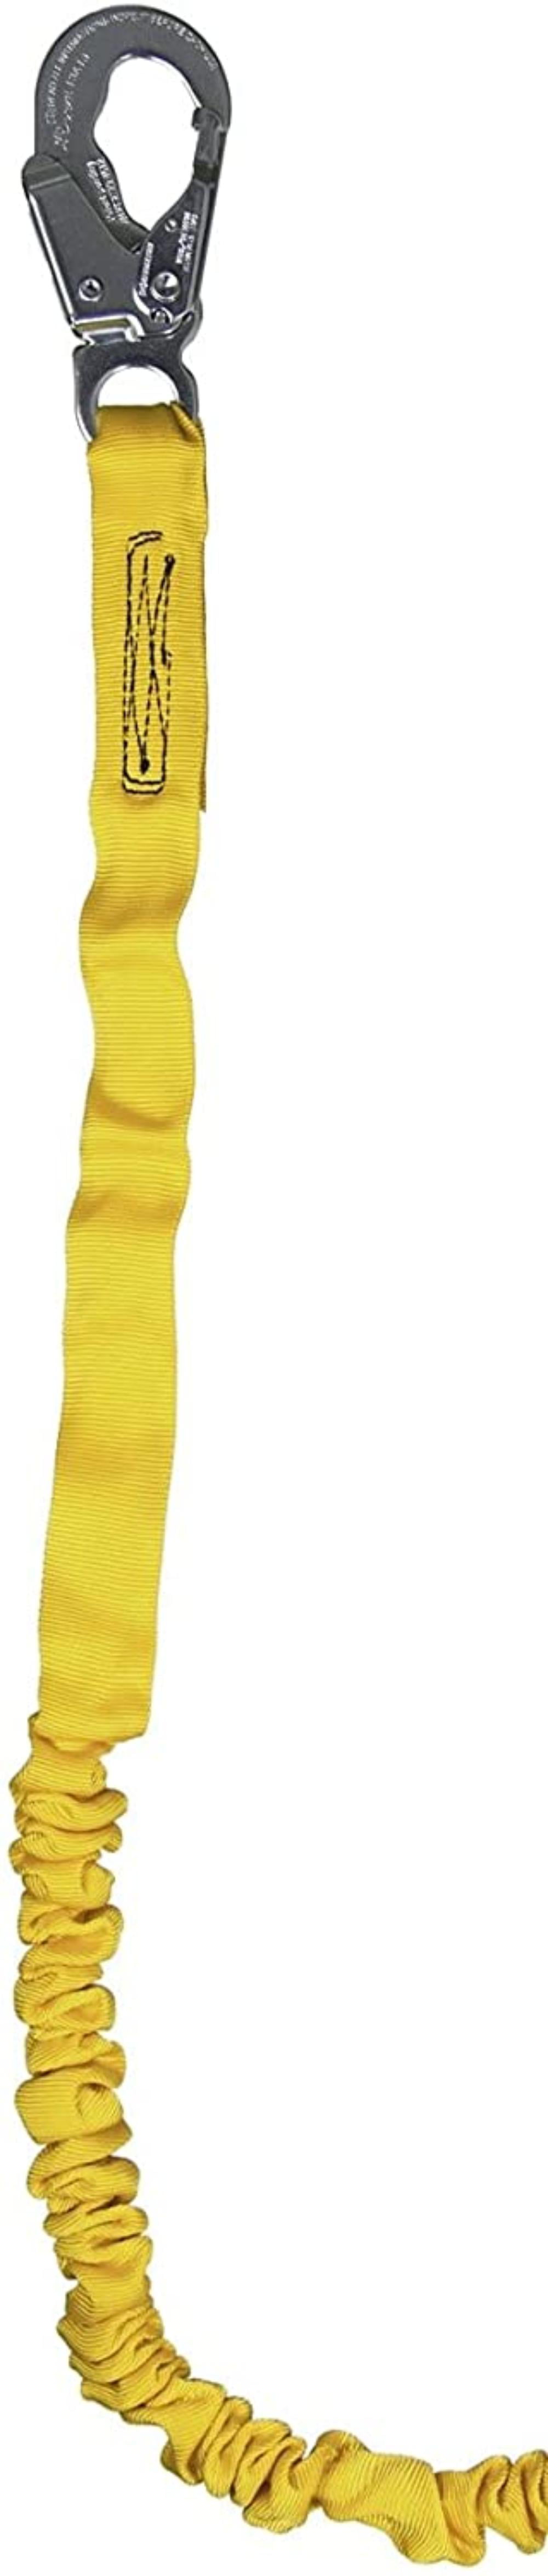 Guardian Fall Protection 11200 IS-72 6-Foot Internal Shock Lanyard with snap ... 